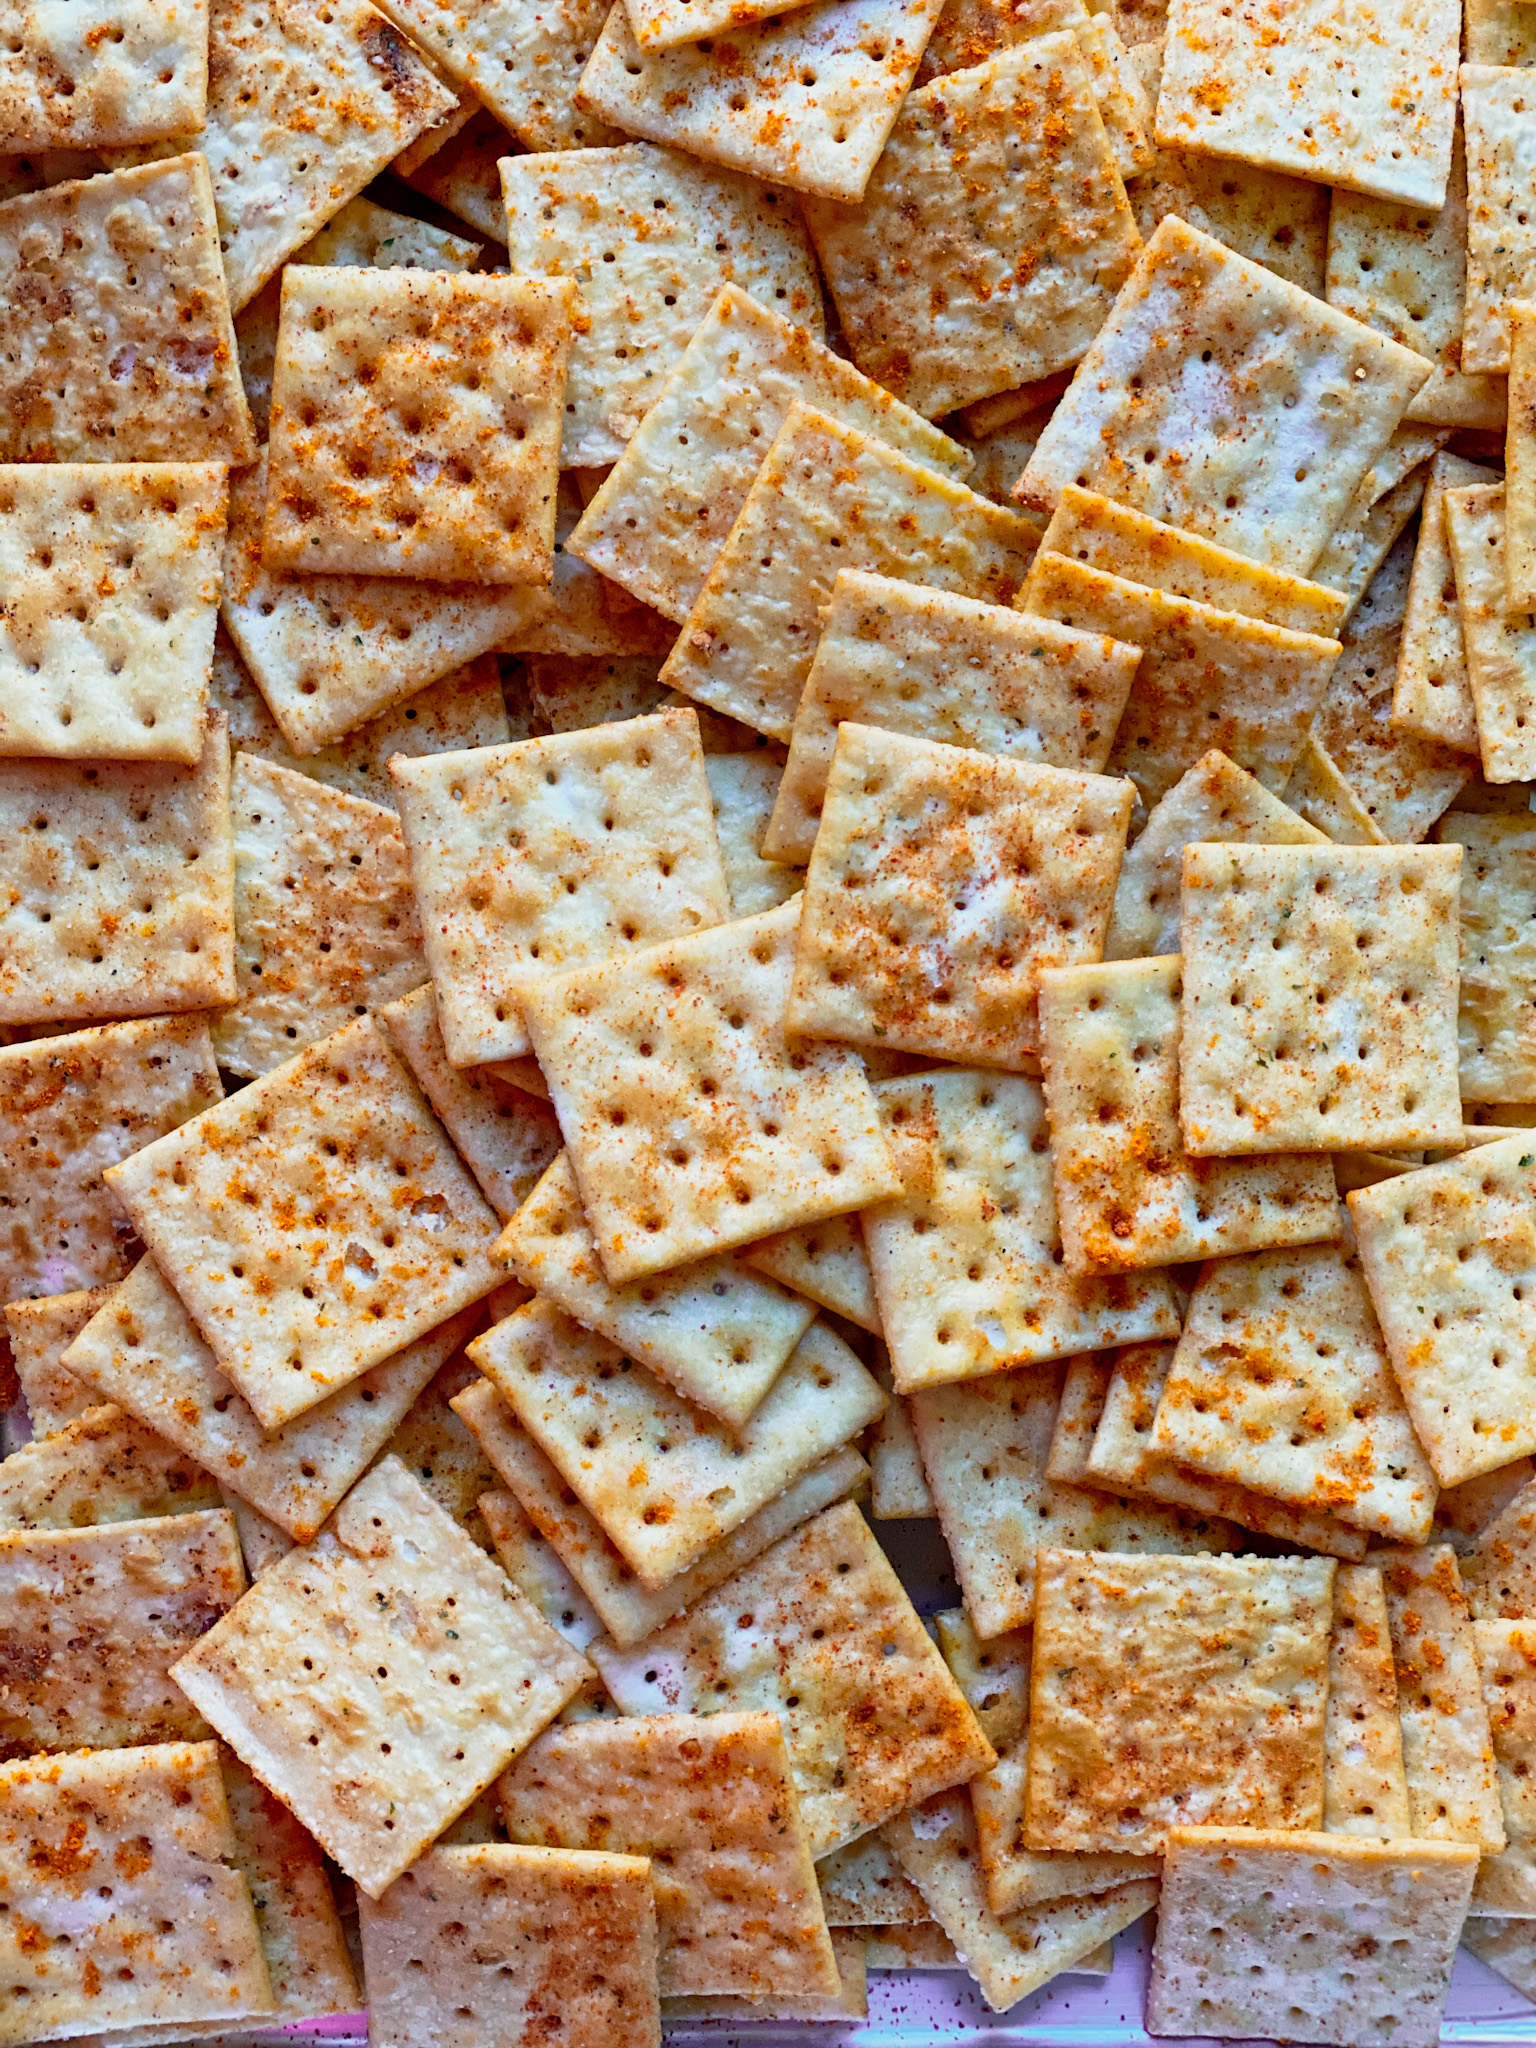 Chili Lime Ranch Crackers - The Perks of Being Us